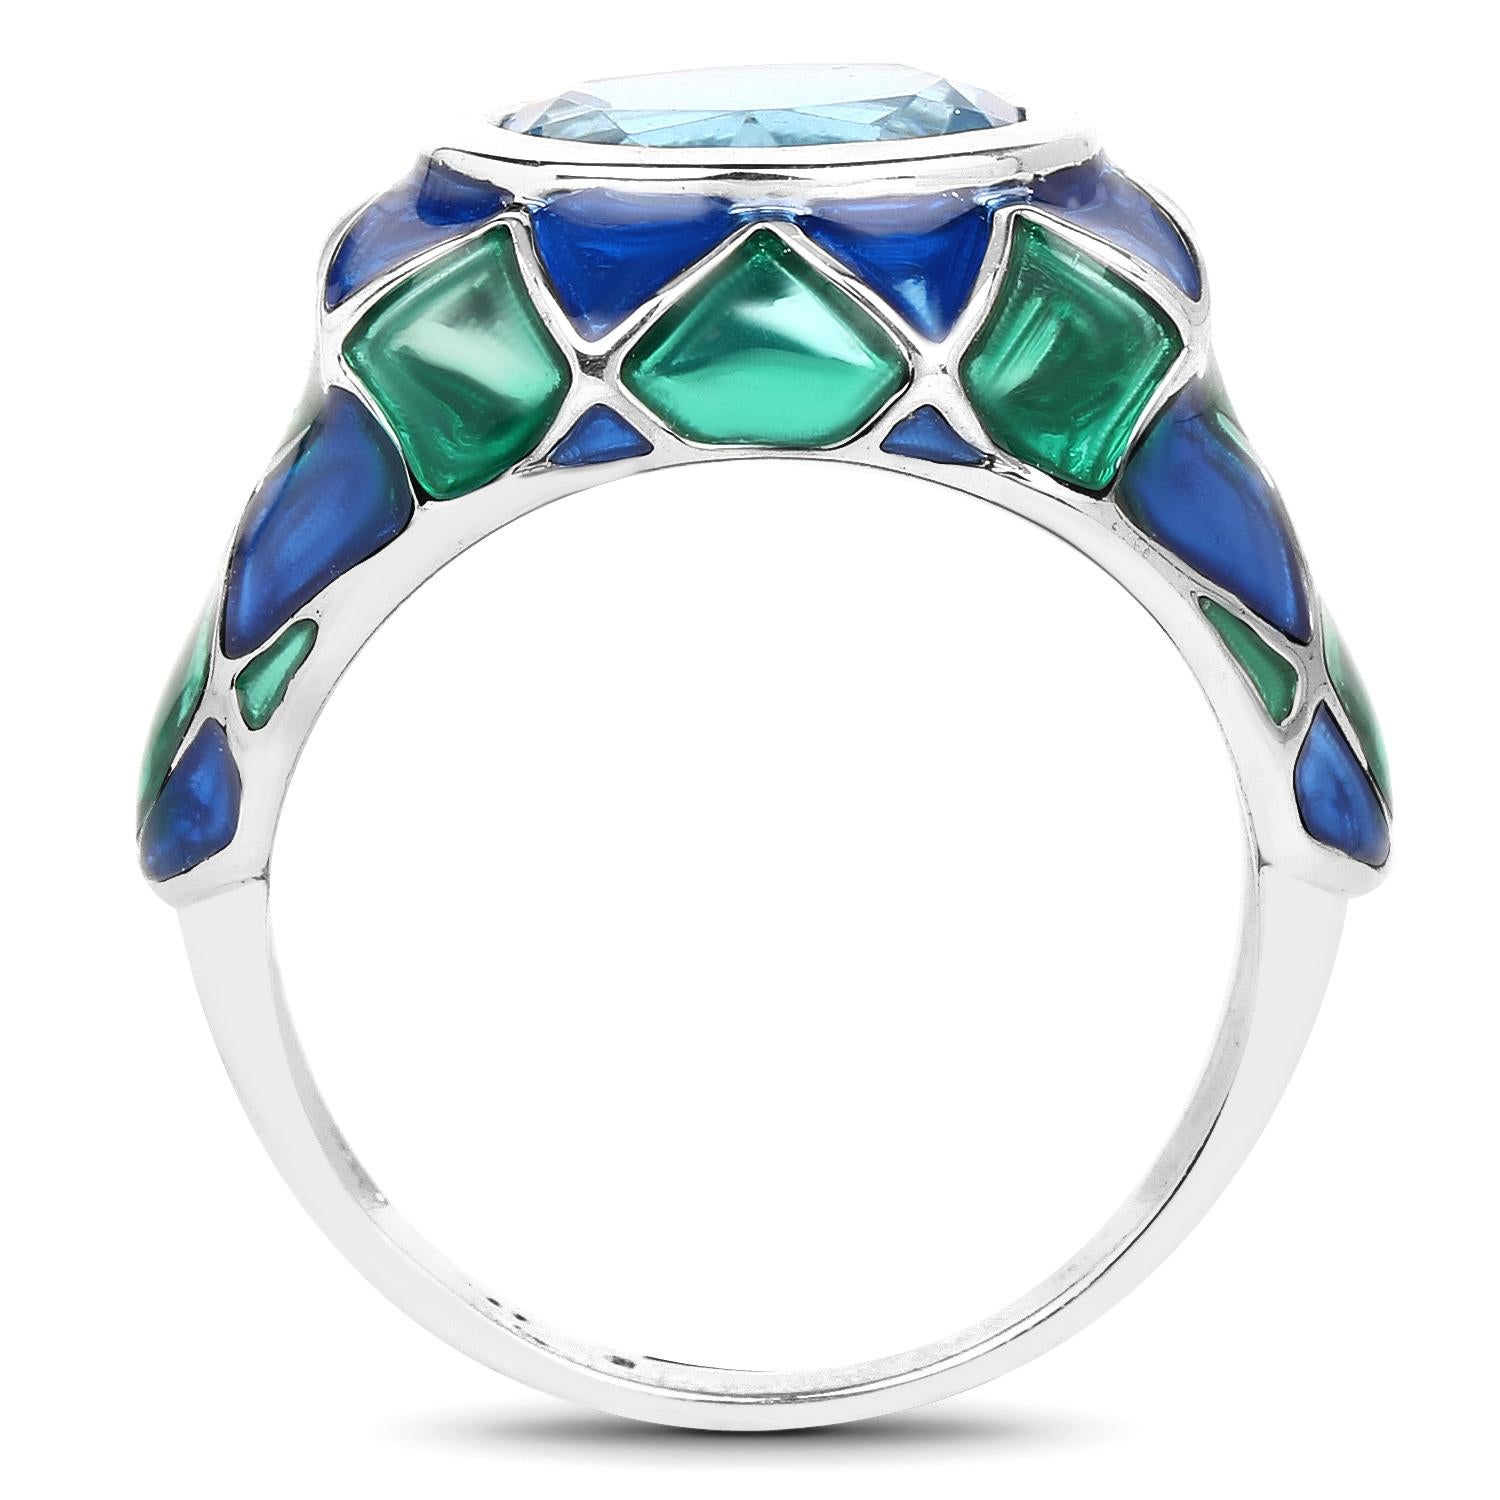 Swiss Blue Topaz Cocktail Ring Blue and Green Enamel 3.25 Carats In Excellent Condition For Sale In Laguna Niguel, CA